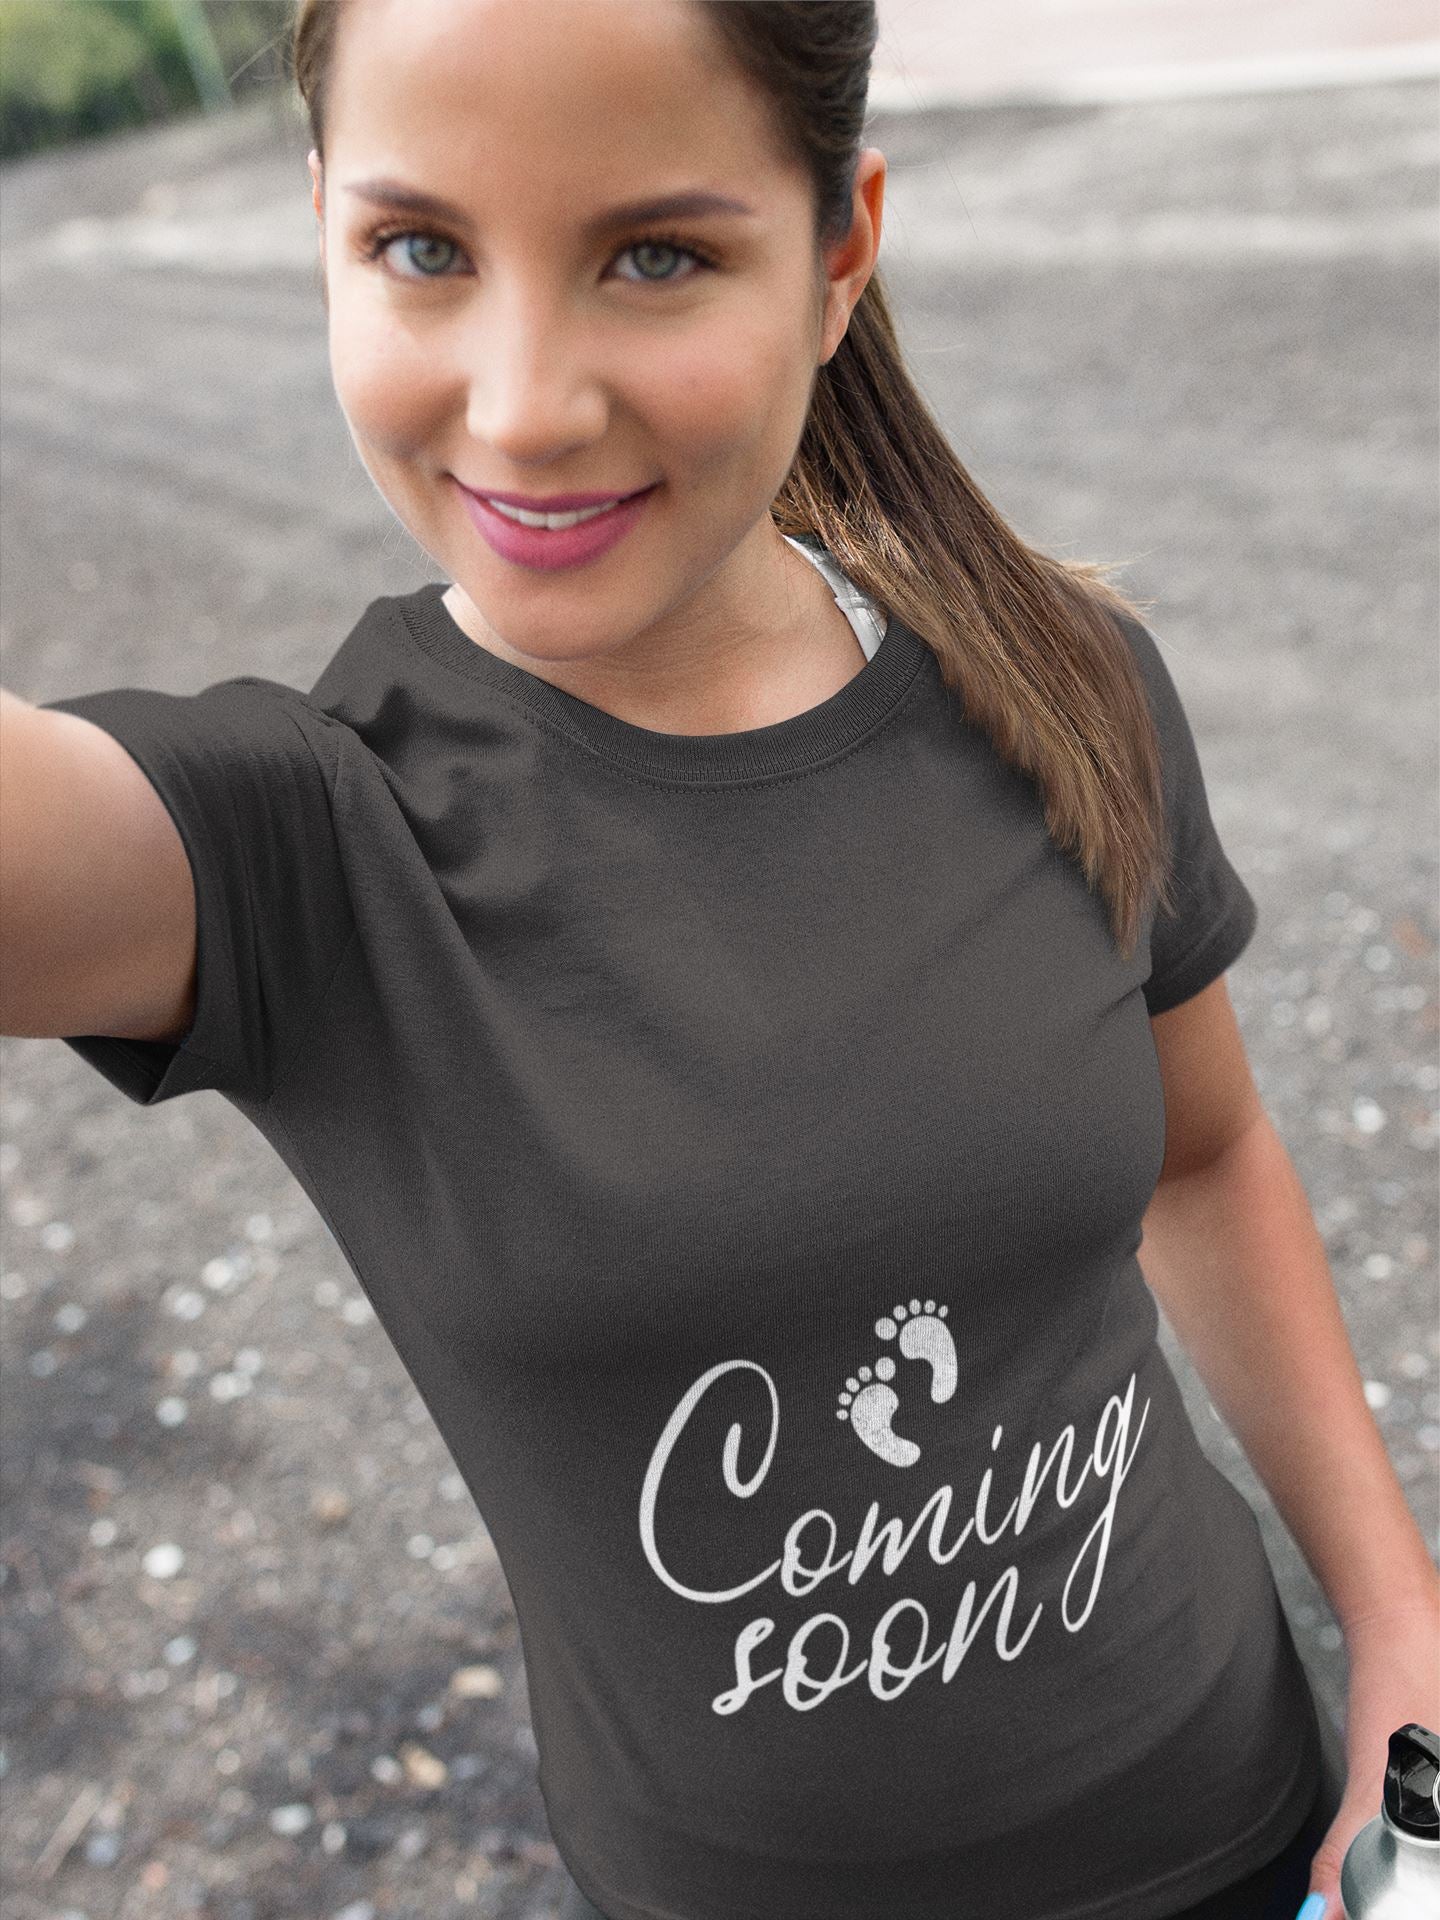 Baby Coming Soon Special Pregnancy Reveal Black T Shirt for Expecting Moms freeshipping - Catch My Drift India